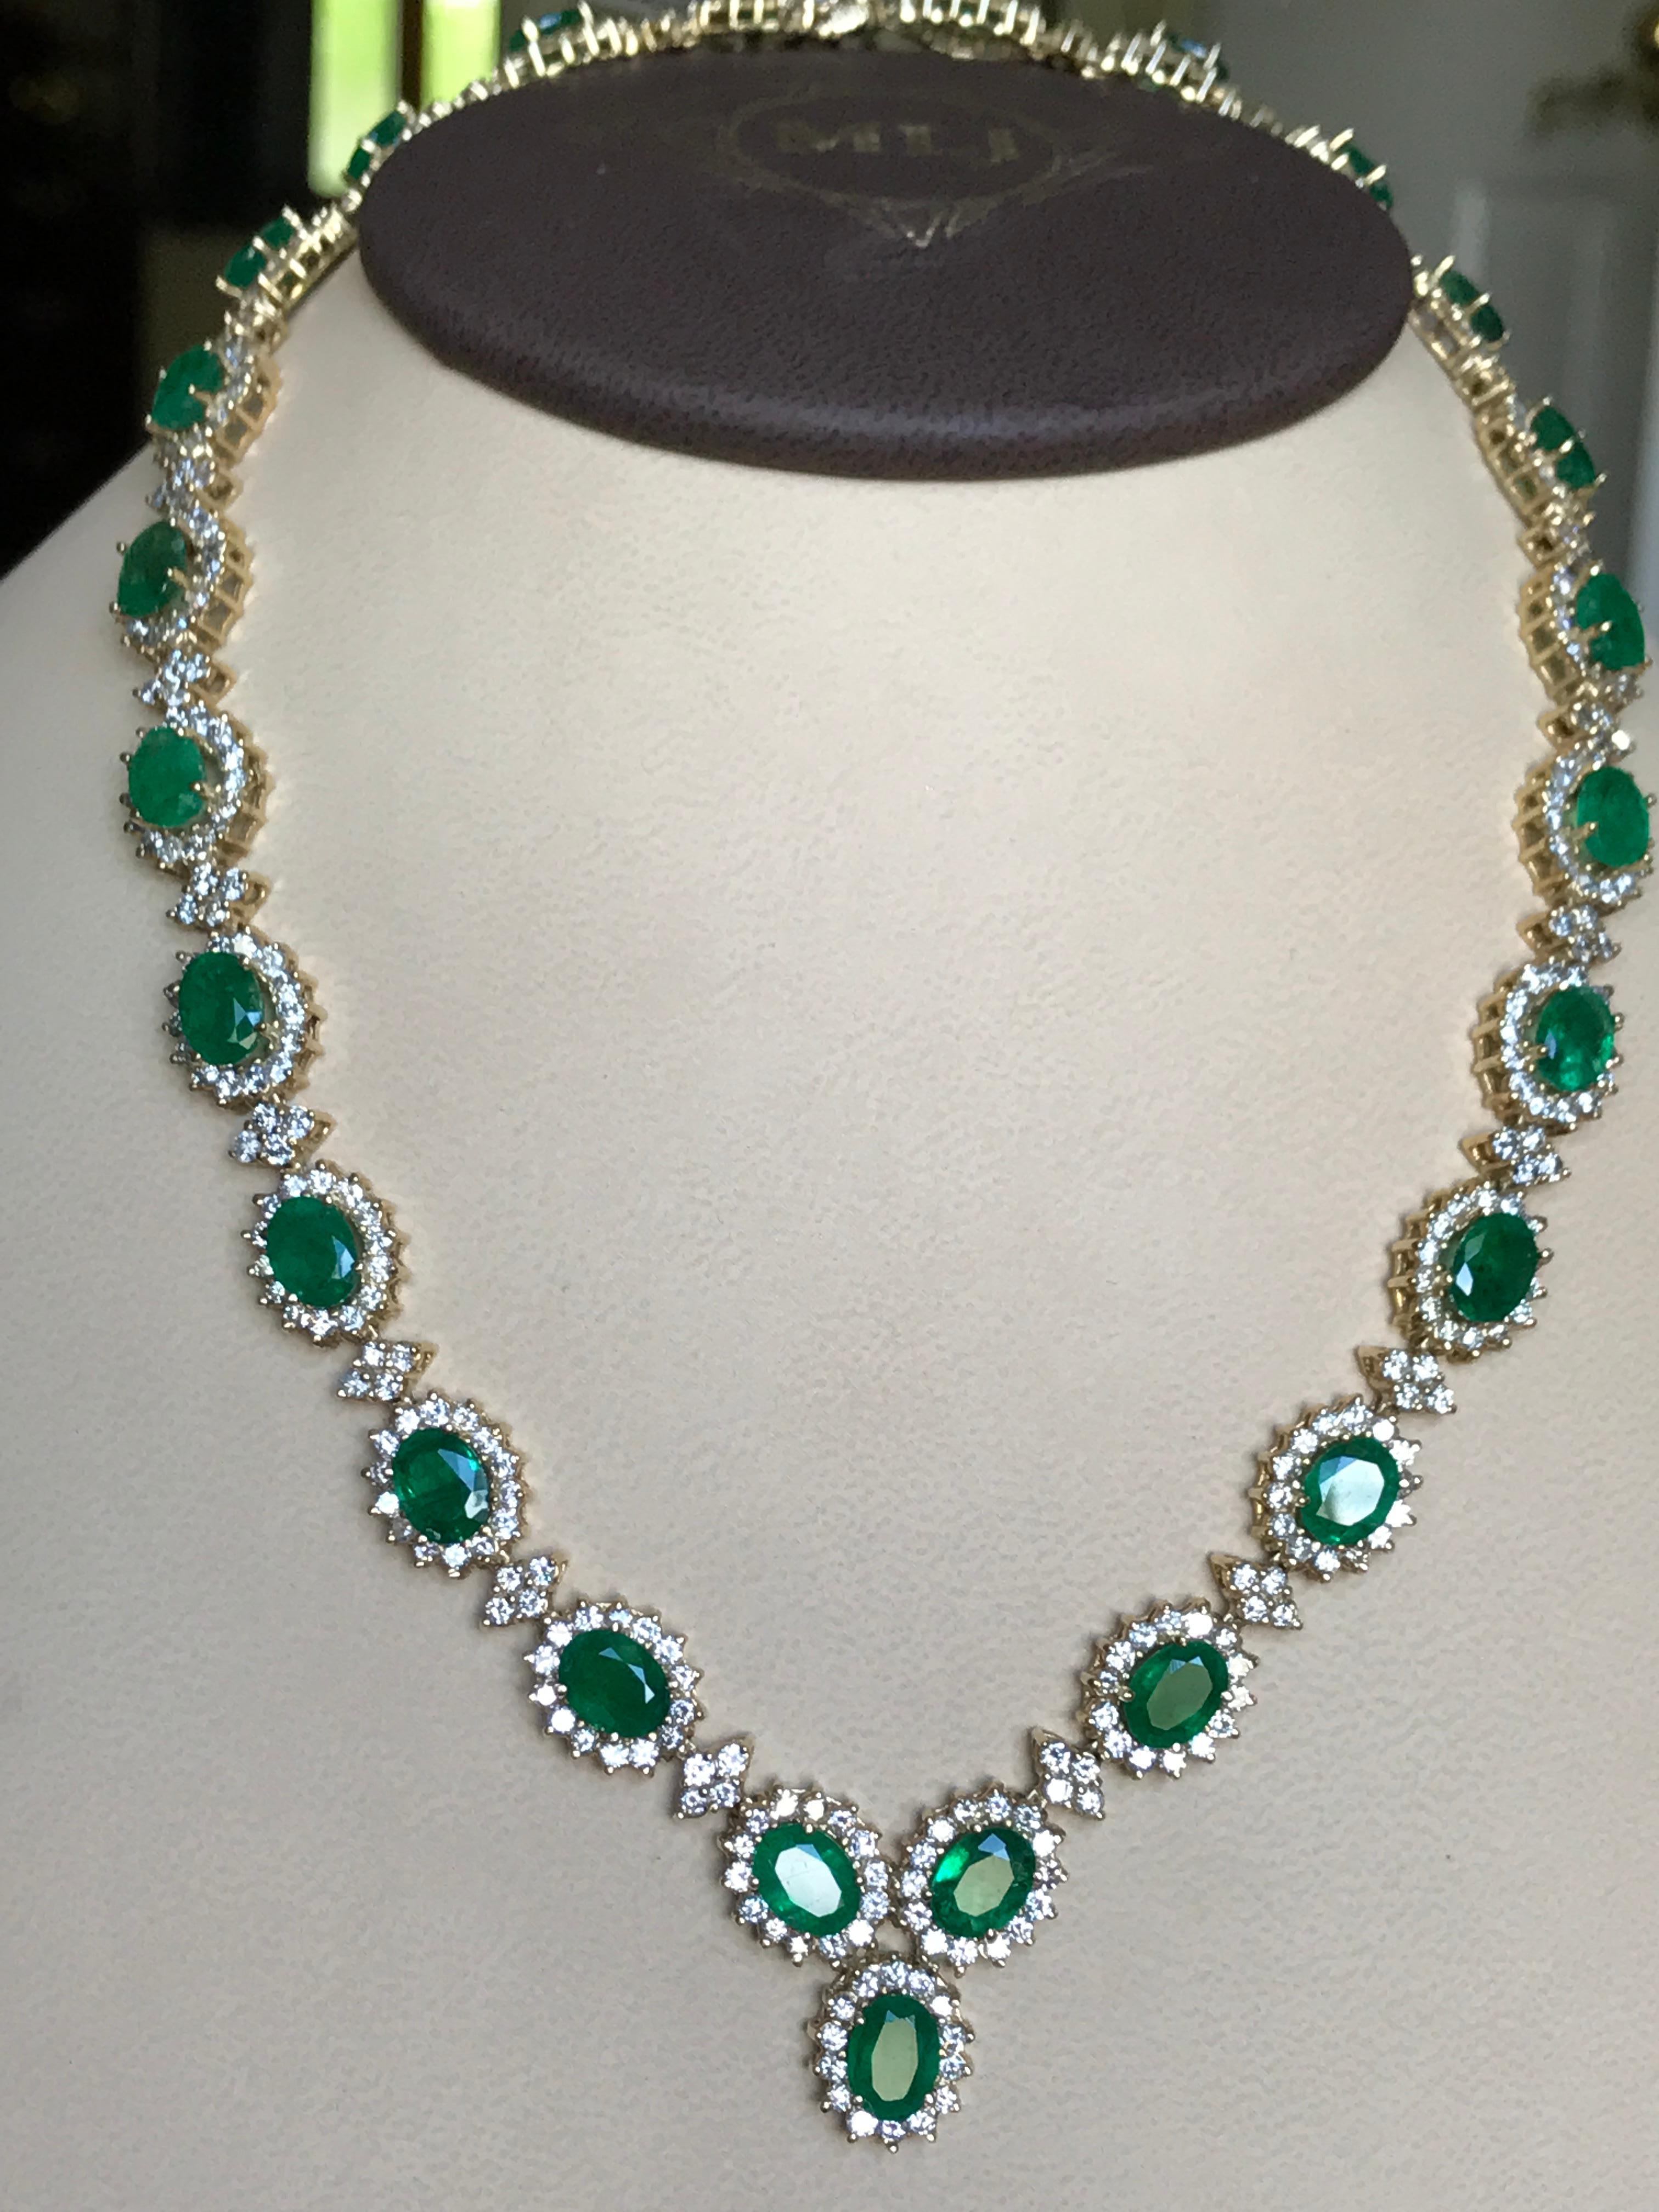 37 Ct Oval Shape Natural Emerald and 22 Carat Diamond Necklace and ...